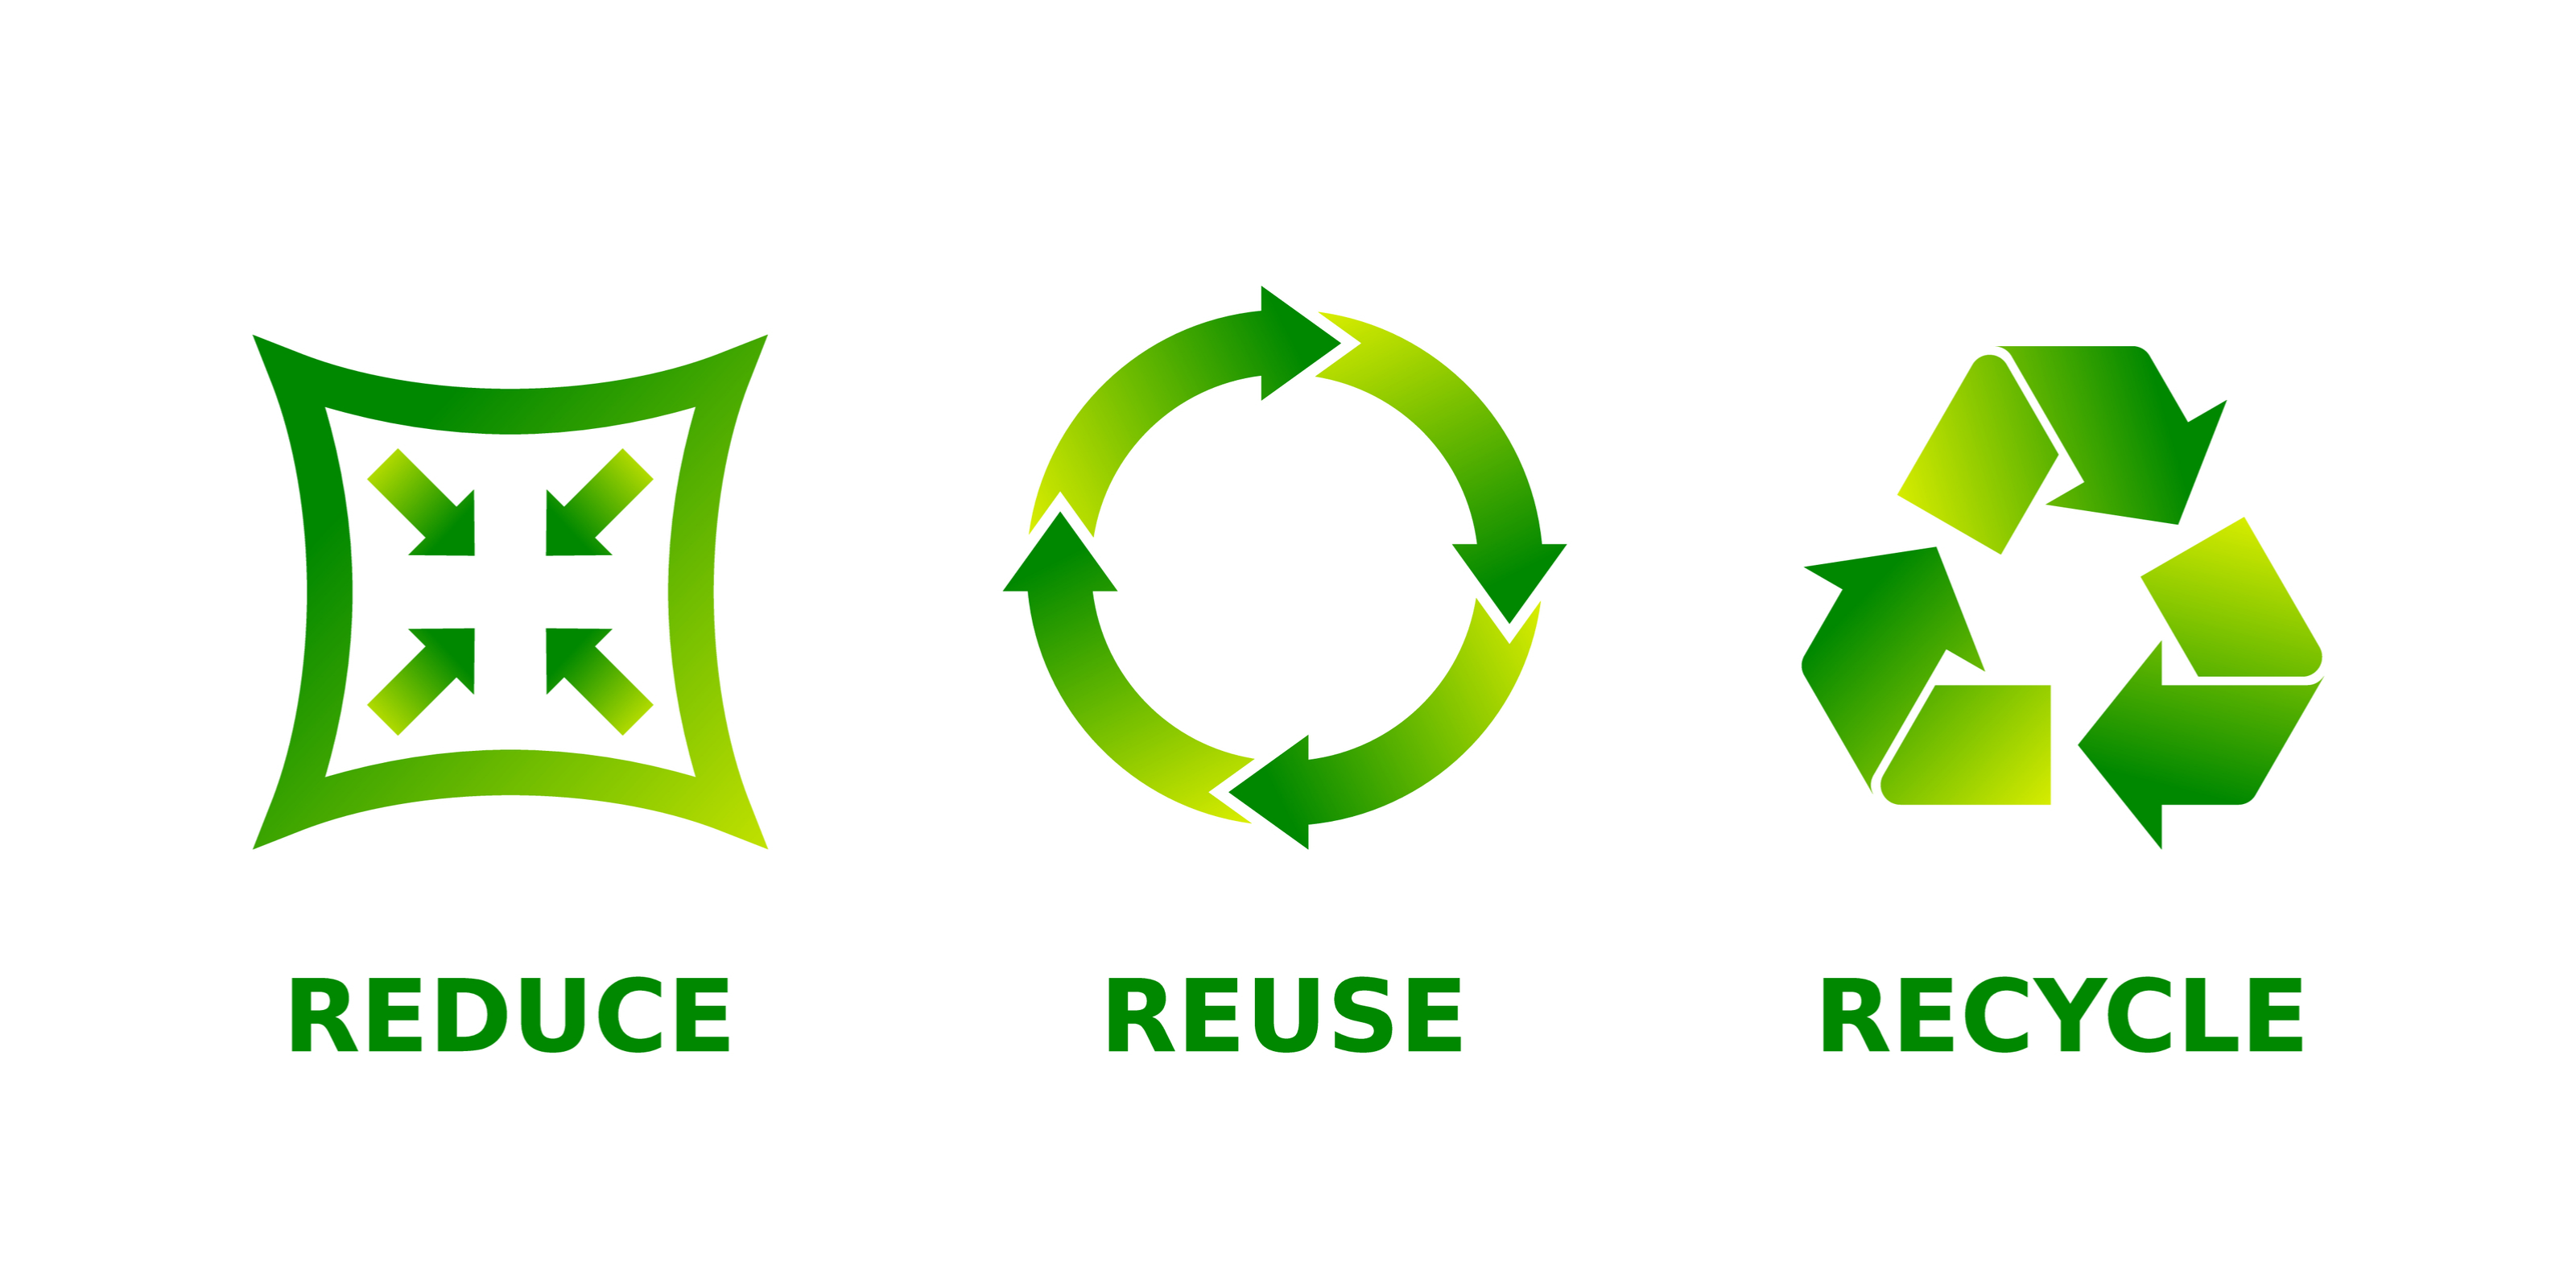 Home reduce. Reduce reuse recycle картинки. 3 RS reduce recycle reuse. 3r reduce reuse recycle. Reduce экология.